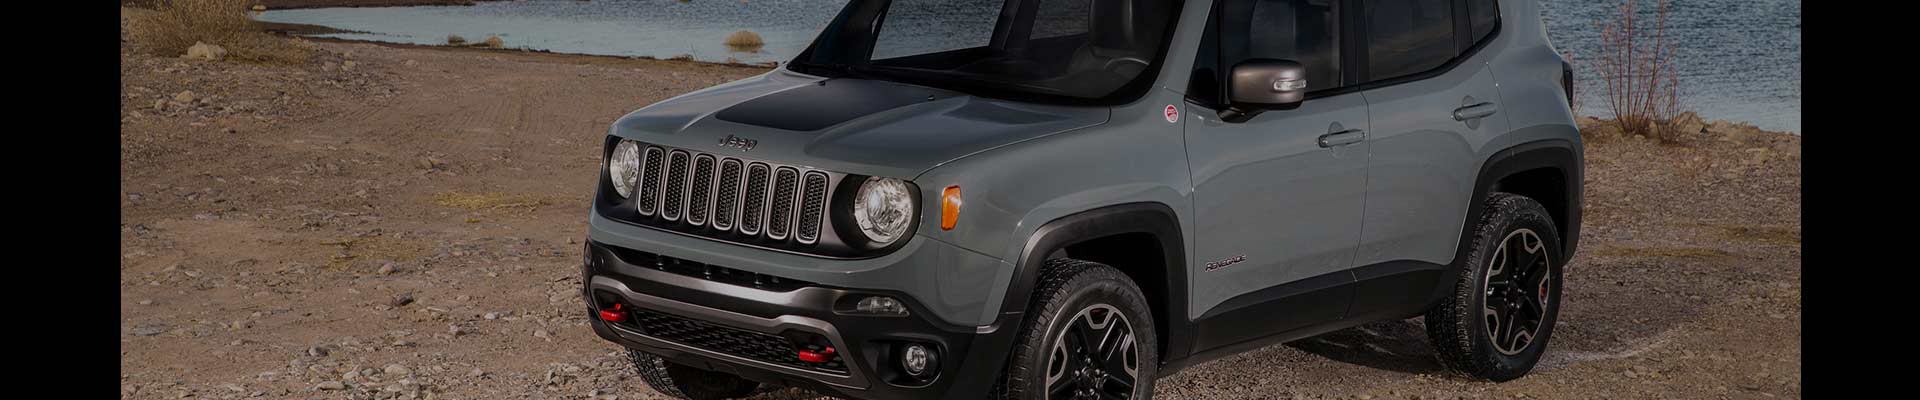 Shop Replacement and OEM Jeep Renegade Parts with Discounted Price on the Net